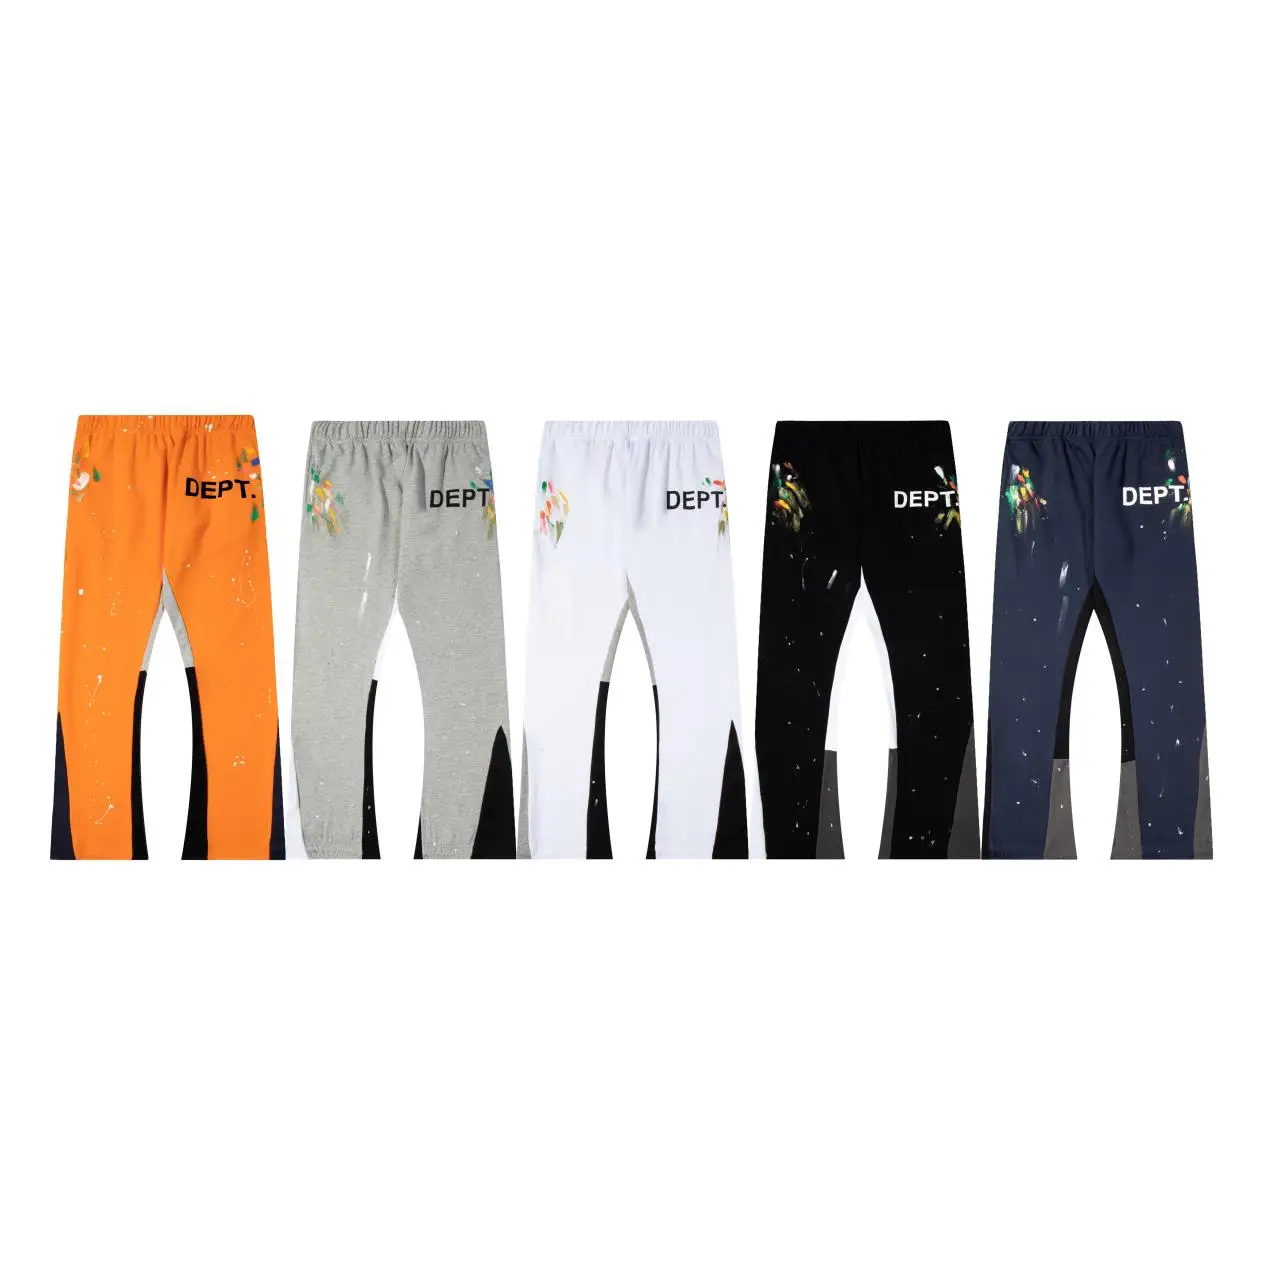 

New fashion GALLERYS spring and autumn painted trumpet sweatpants high quality DEPTS street trousers for men and women